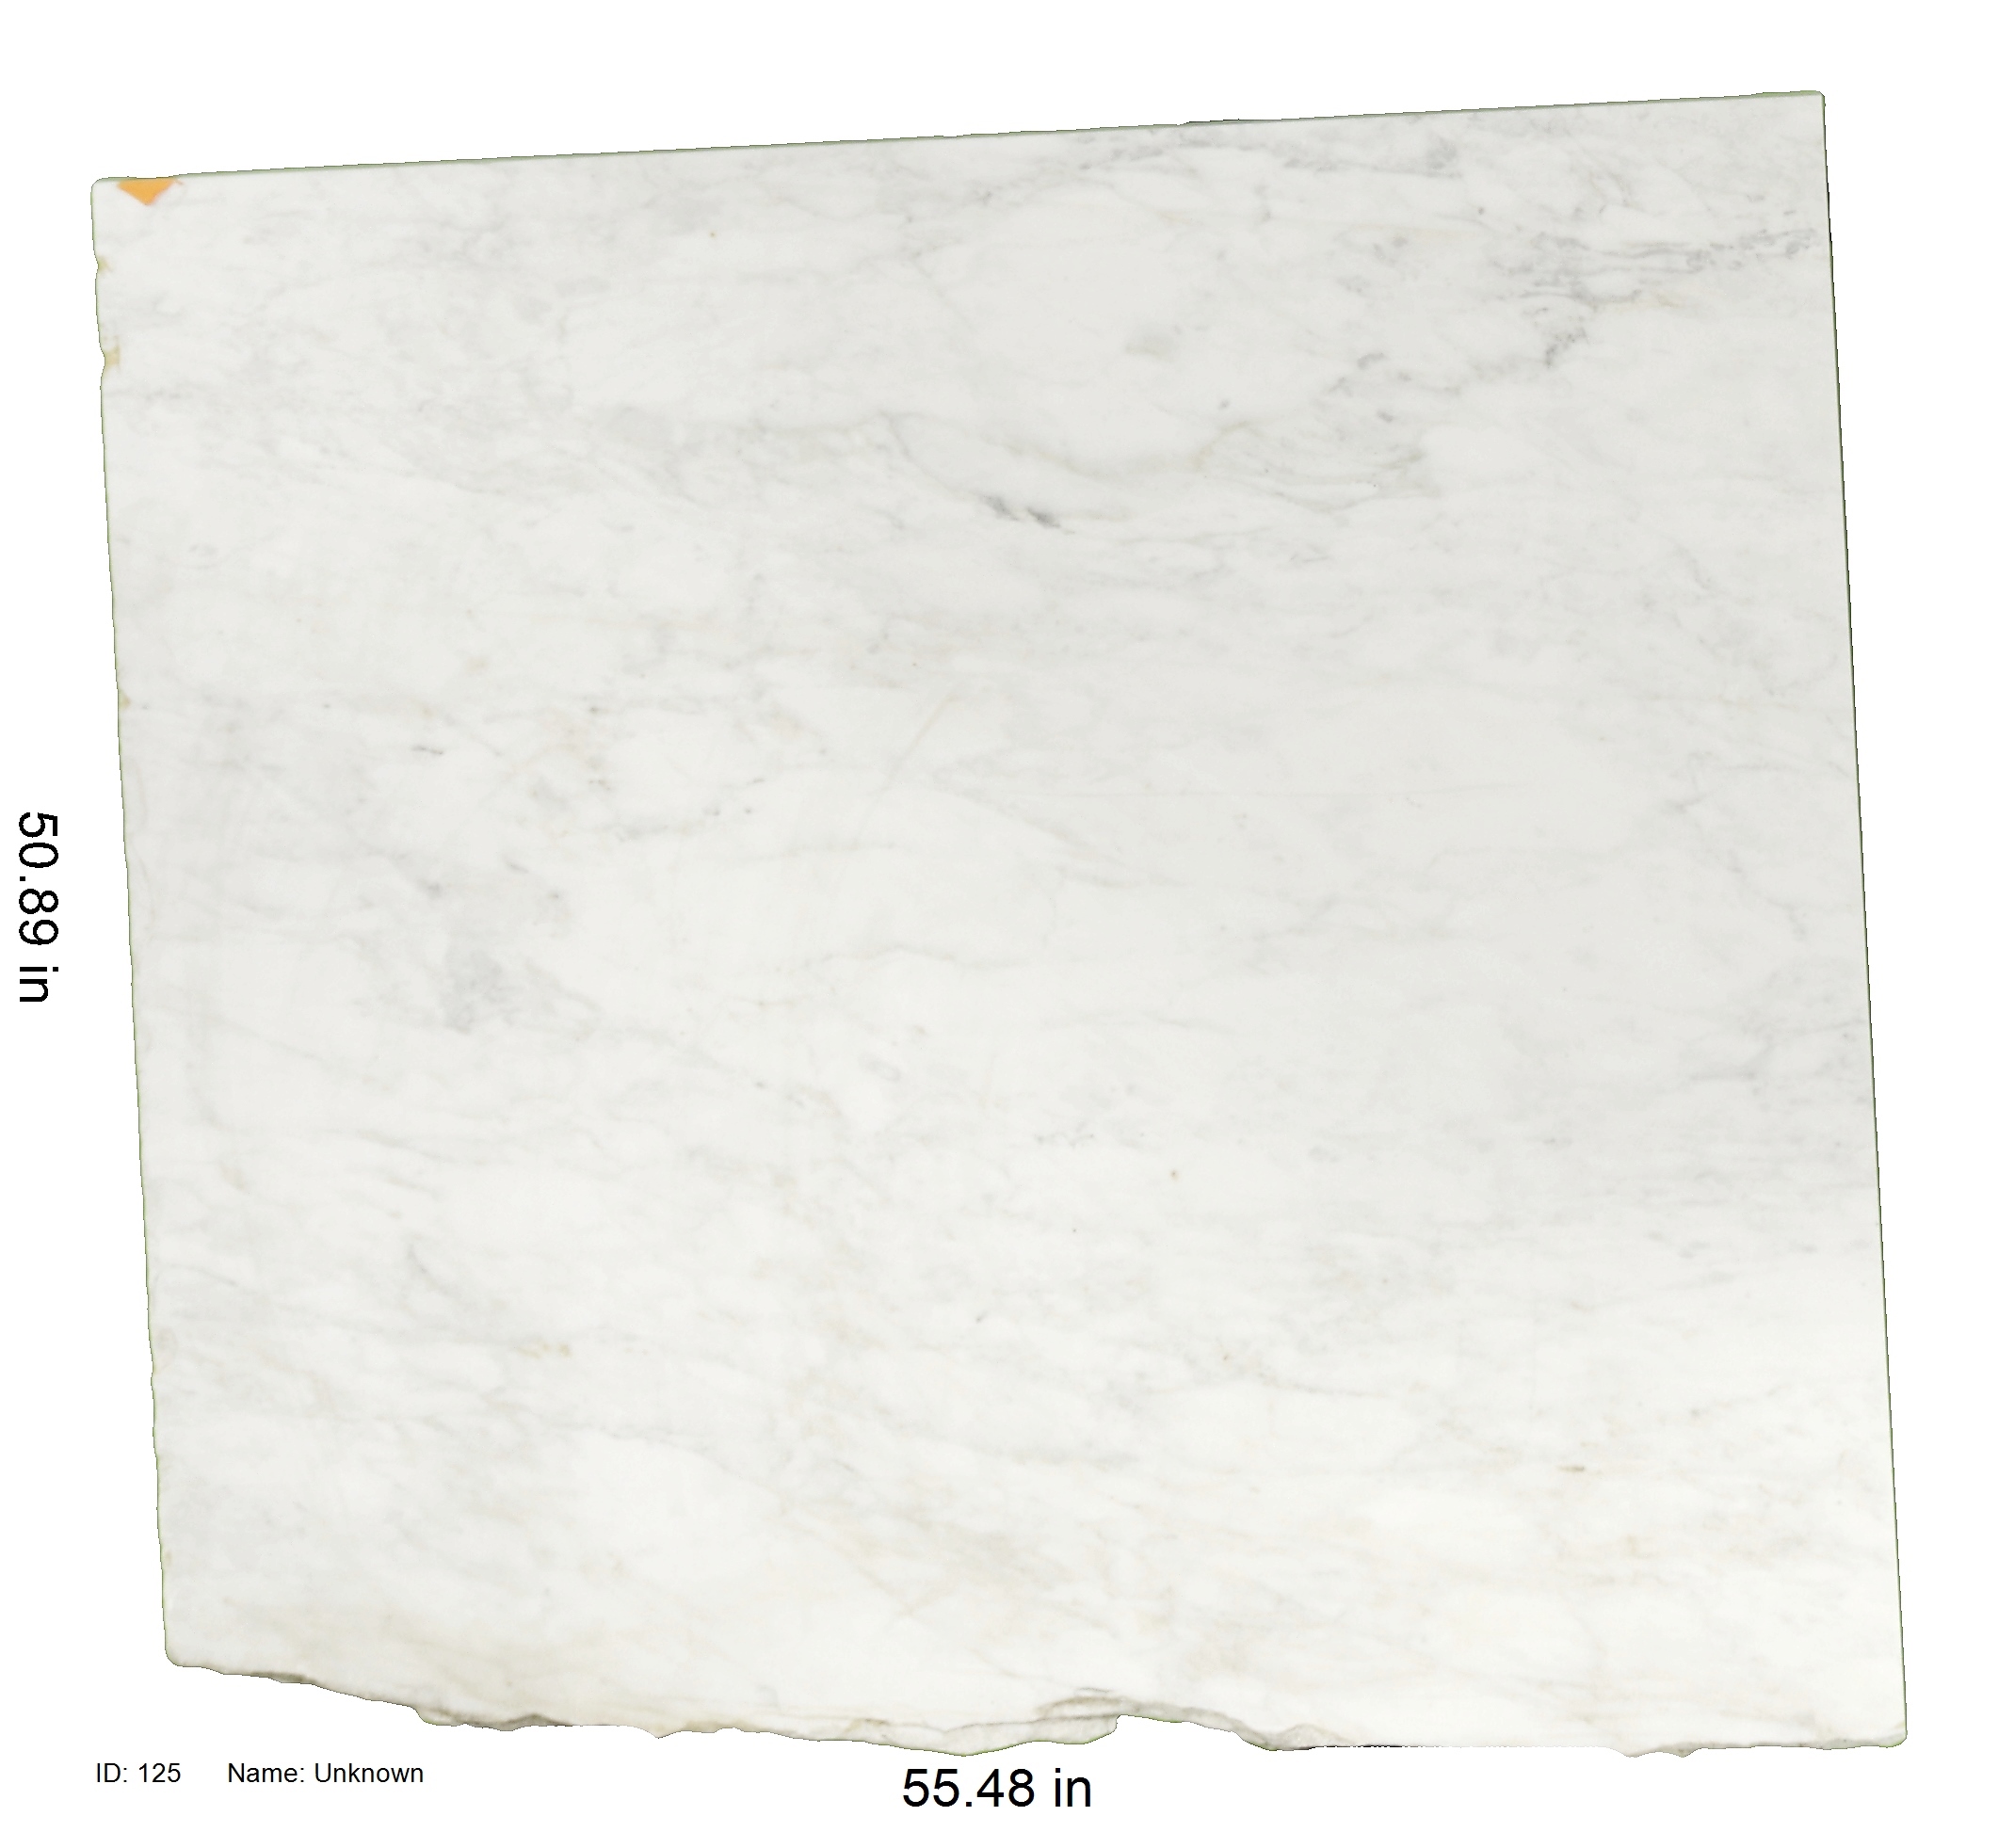 White and Grey Marble<br />
ID: 125<br />
Name: Unknown<br />
Size: 50.89x55.48